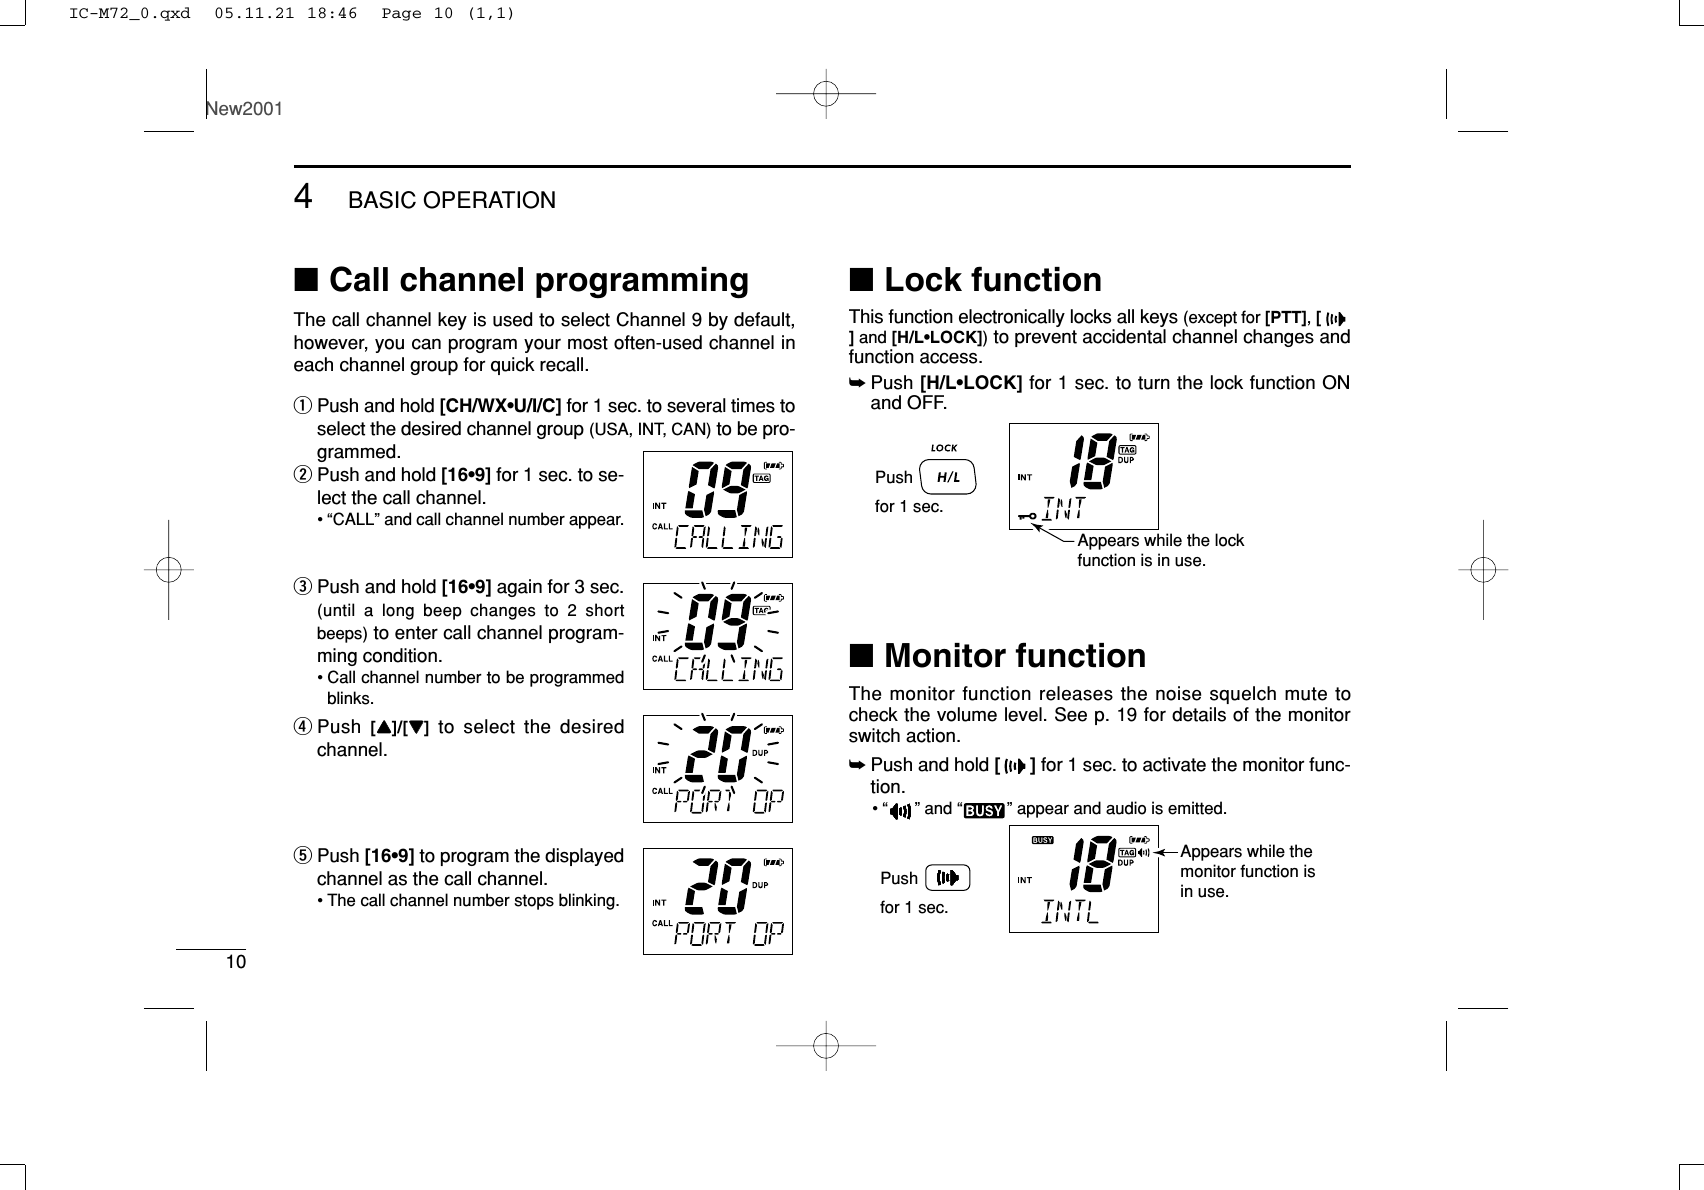 104BASIC OPERATIONNew2001■Call channel programmingThe call channel key is used to select Channel 9 by default,however, you can program your most often-used channel ineach channel group for quick recall.qPush and hold [CH/WX•U/I/C] for 1 sec. to several times toselect the desired channel group (USA, INT, CAN) to be pro-grammed.wPush and hold [16•9] for 1 sec. to se-lect the call channel.•“CALL” and call channel number appear.ePush and hold [16•9] again for 3 sec.(until a long beep changes to 2 shortbeeps) to enter call channel program-ming condition.•Call channel number to be programmedblinks.rPush  [YY]/[ZZ]to select the desiredchannel.tPush [16•9] to program the displayedchannel as the call channel.•The call channel number stops blinking.■Lock functionThis function electronically locks all keys (except for [PTT], []and [H/L•LOCK])to prevent accidental channel changes andfunction access.➥Push [H/L•LOCK] for 1 sec. to turn the lock function ONand OFF.■Monitor functionThe monitor function releases the noise squelch mute tocheck the volume level. See p. 19 for details of the monitorswitch action.➥Push and hold []for 1 sec. to activate the monitor func-tion.•“ ” and “” appear and audio is emitted.Pushfor 1 sec.Appears while the monitor function is in use.Pushfor 1 sec.Appears while the lockfunction is in use.IC-M72_0.qxd  05.11.21 18:46  Page 10 (1,1)